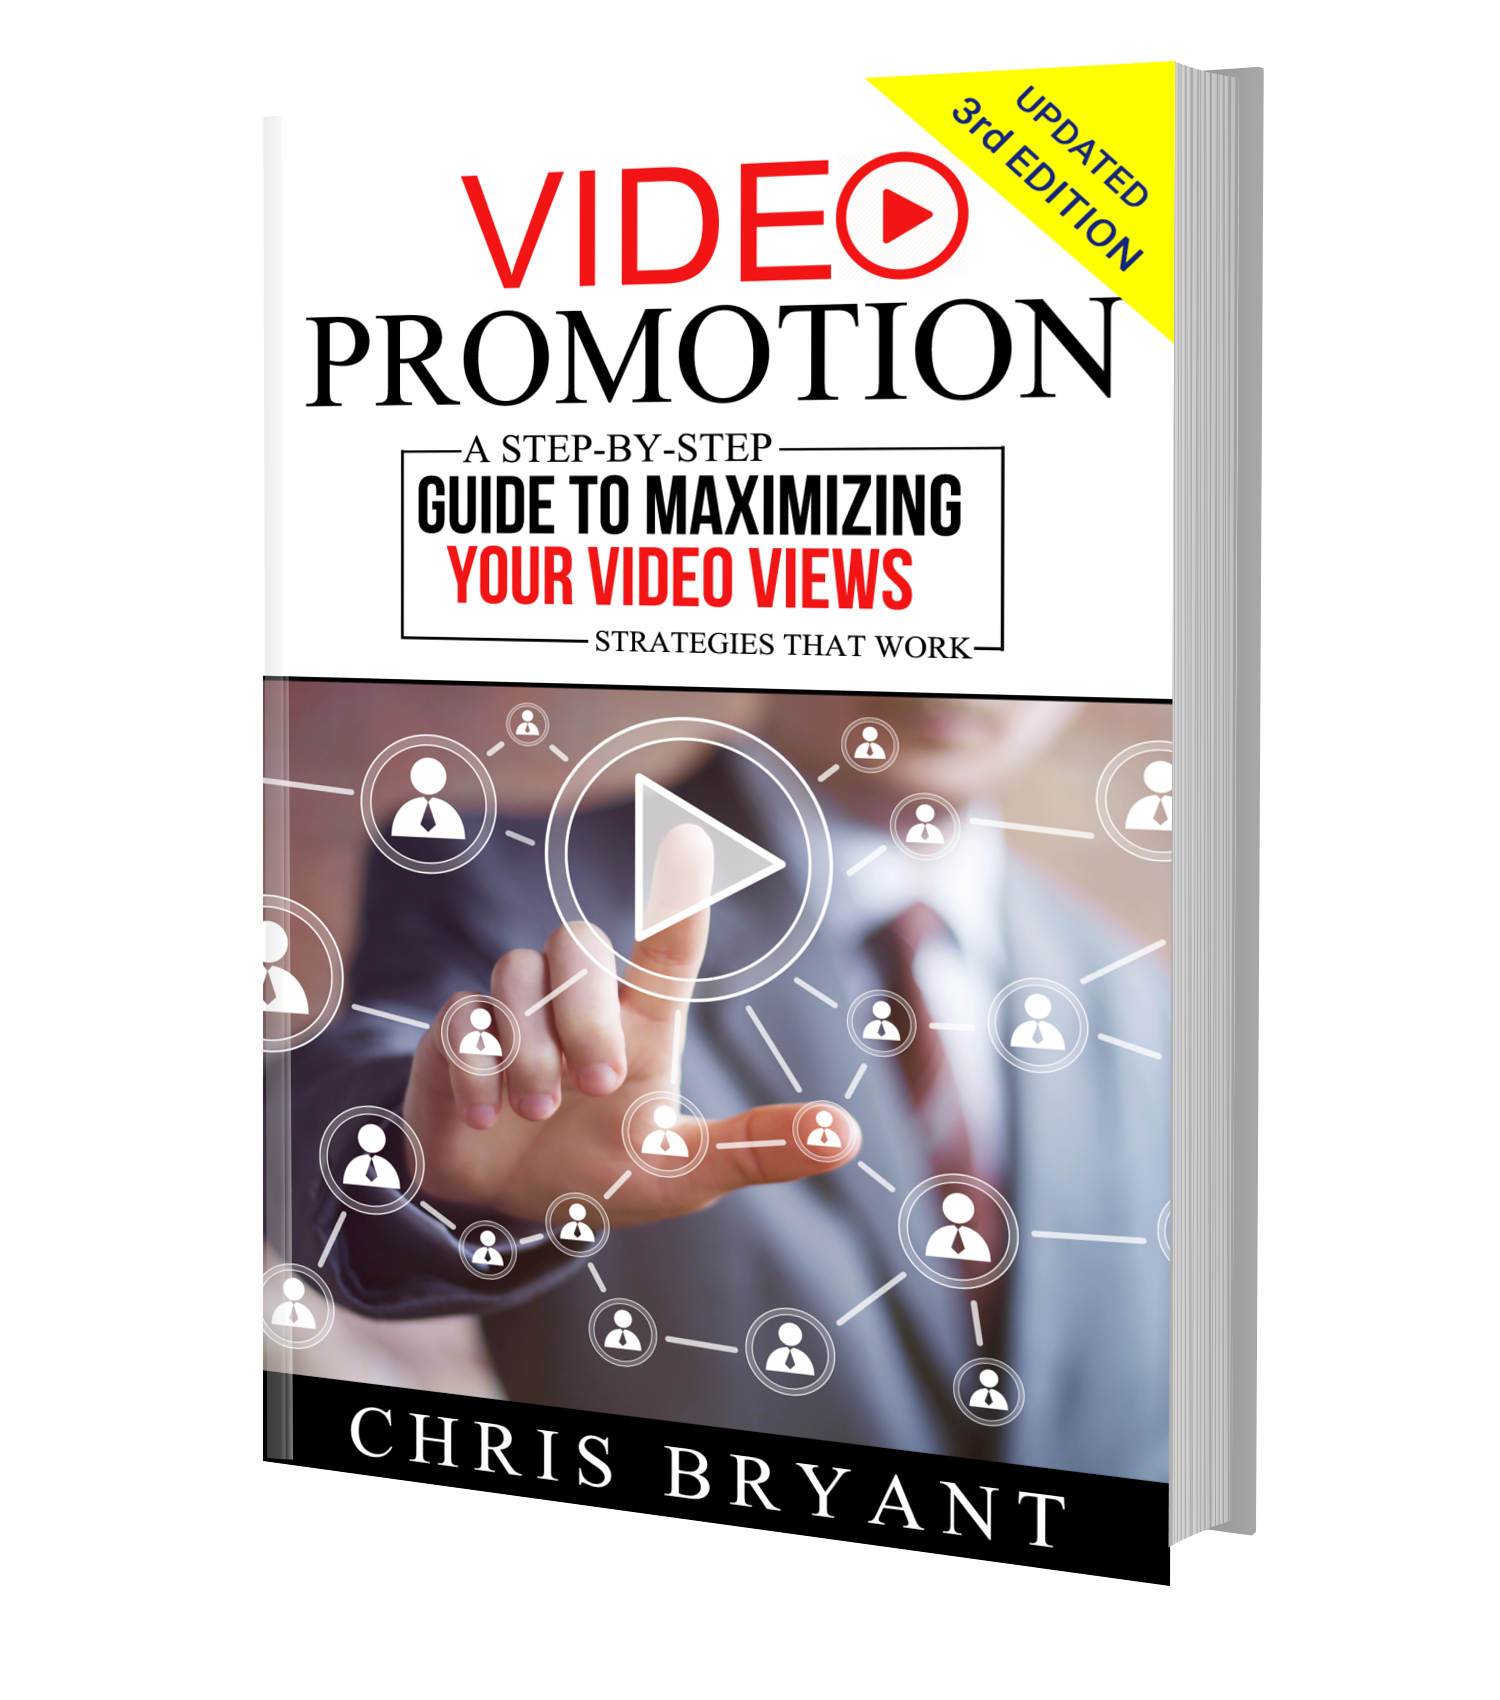 FREE: Video Promotion: A Step-by-Step Guide to Maximizing Your Video Views – Strategies That Work by Chris Bryant